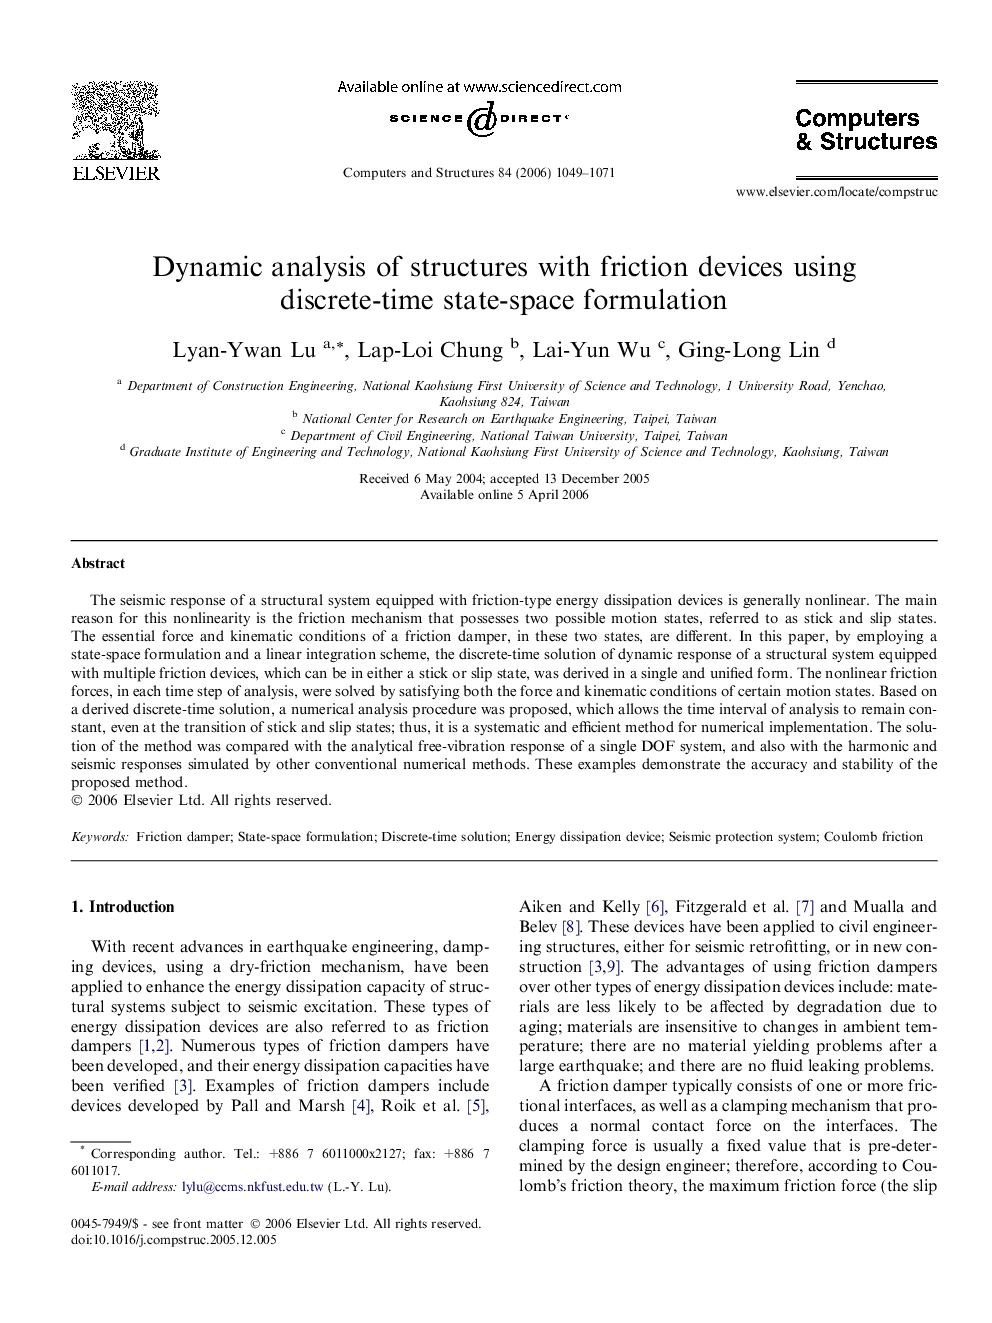 Dynamic analysis of structures with friction devices using discrete-time state-space formulation